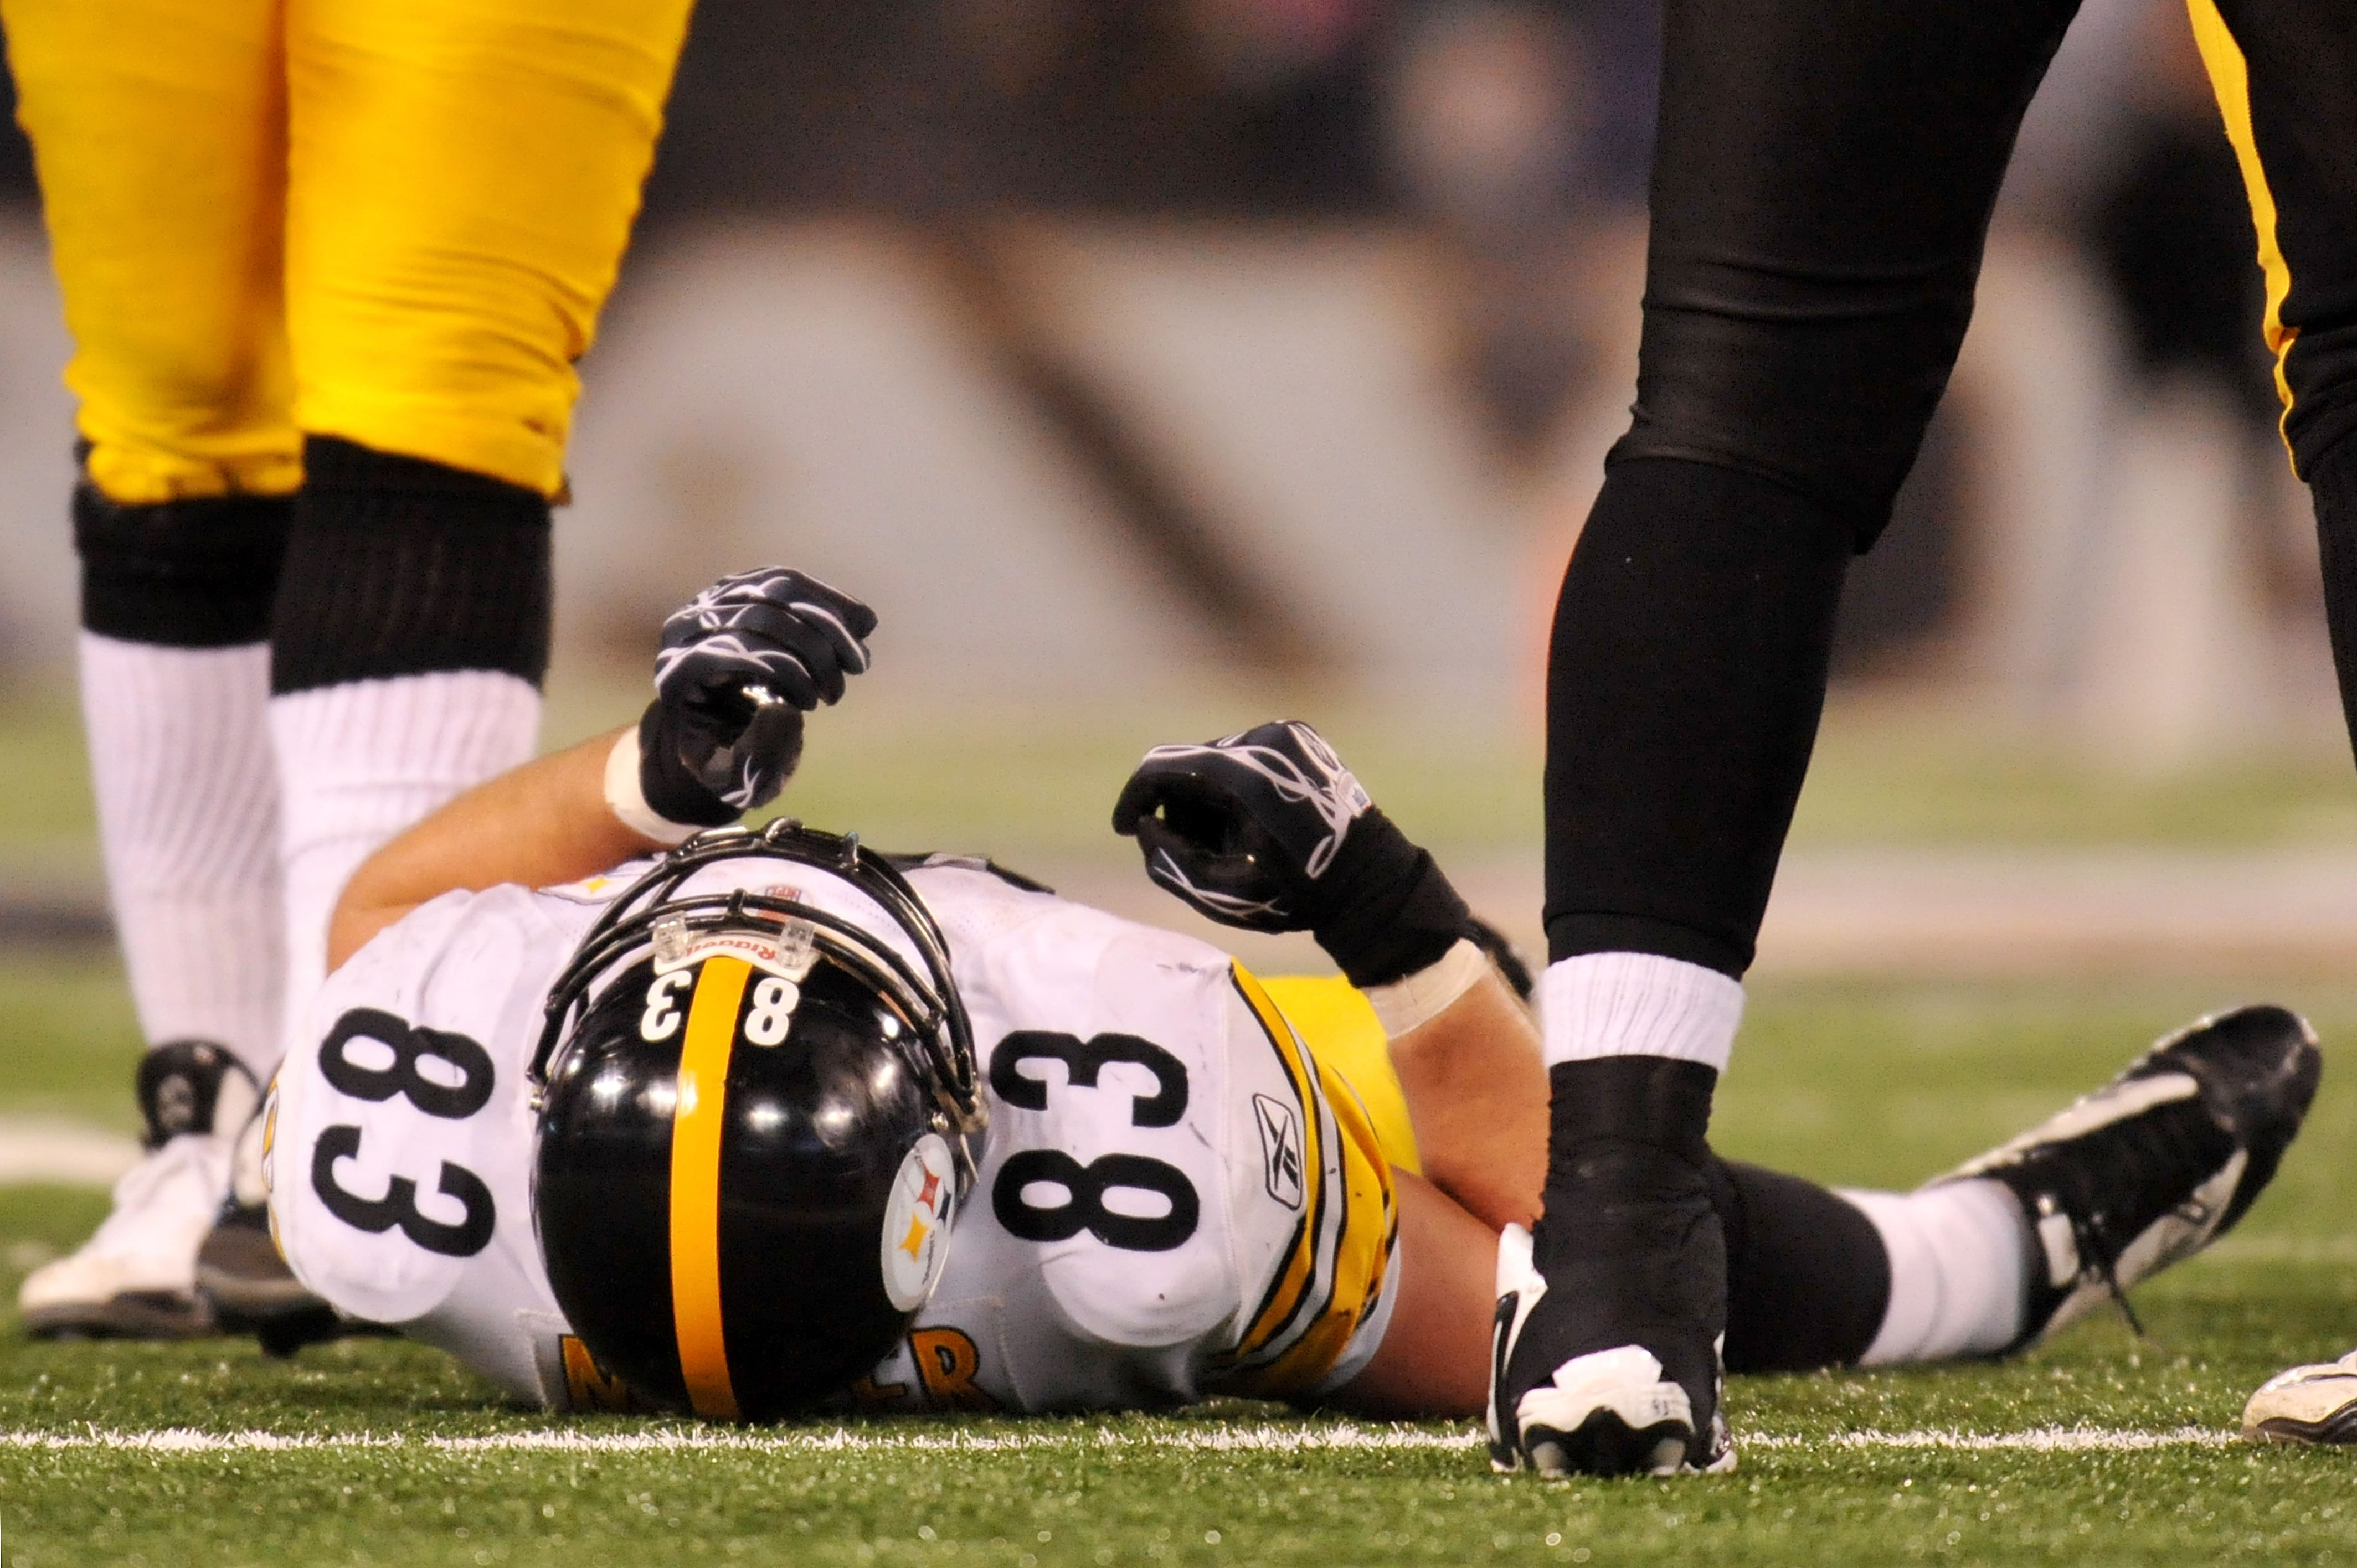 BALTIMORE, MD - DECEMBER 05:  Tight end Heath Miller #83 of the Pittsburgh Steelers lies on the field after being injured during the third quarter of the game against the Baltimore Ravens at M&T Bank Stadium on December 5, 2010 in Baltimore, Maryland.  (P